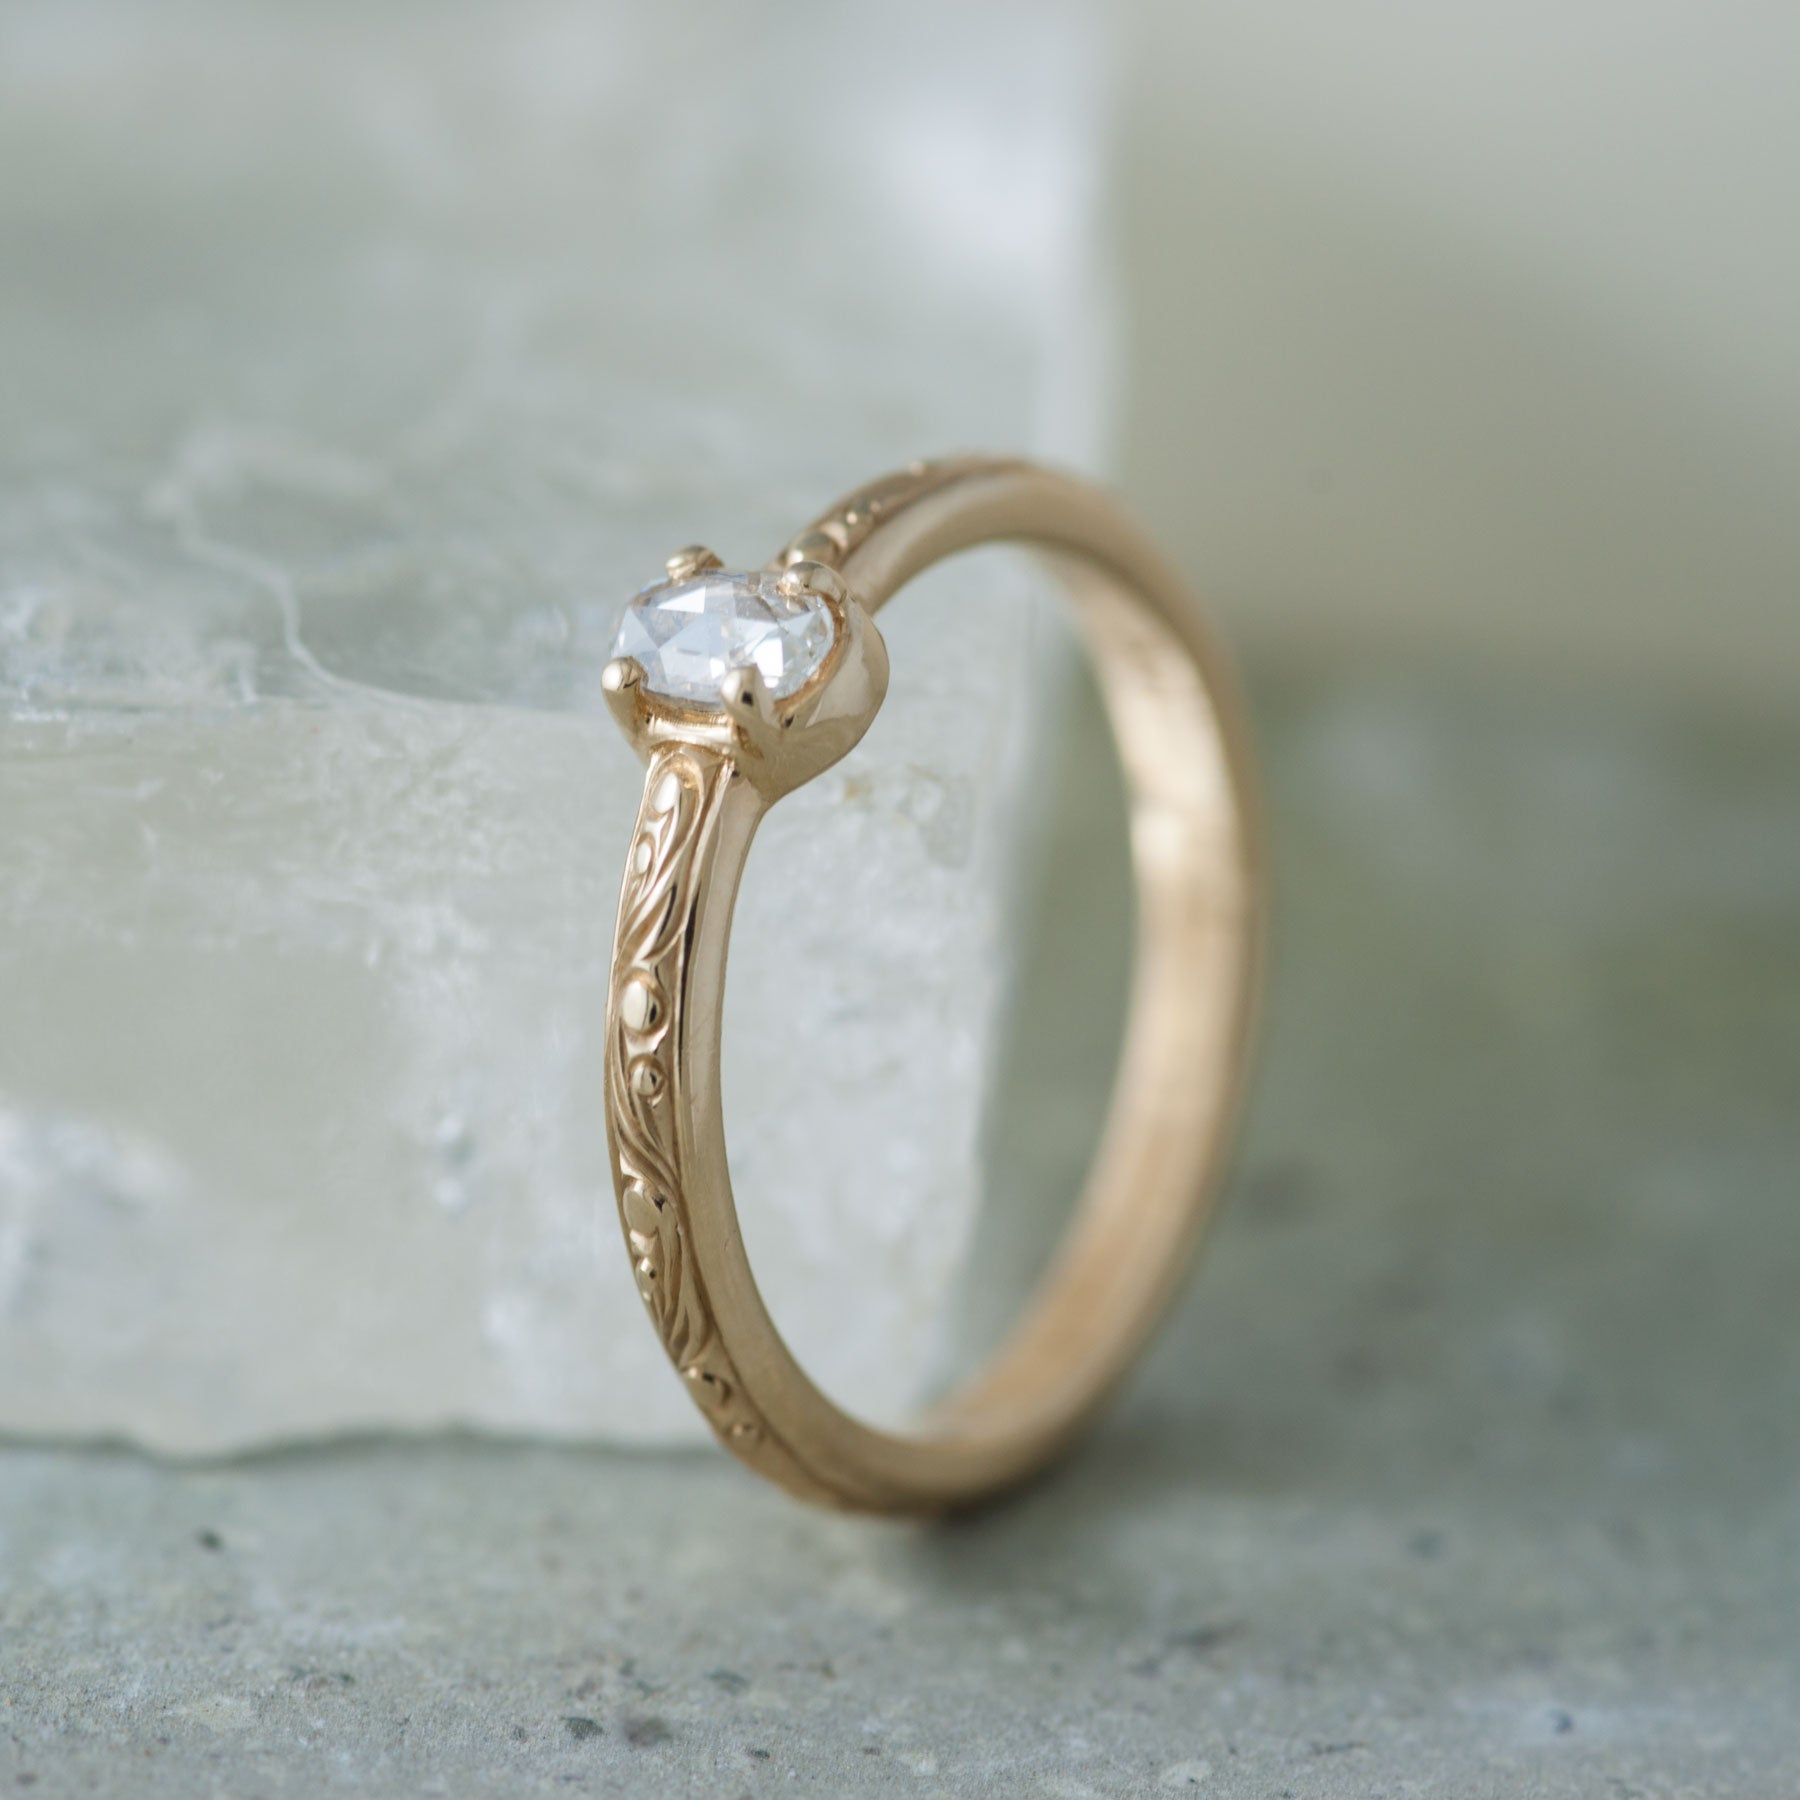 Unique hand engraved diamond engagement ring in yellow gold